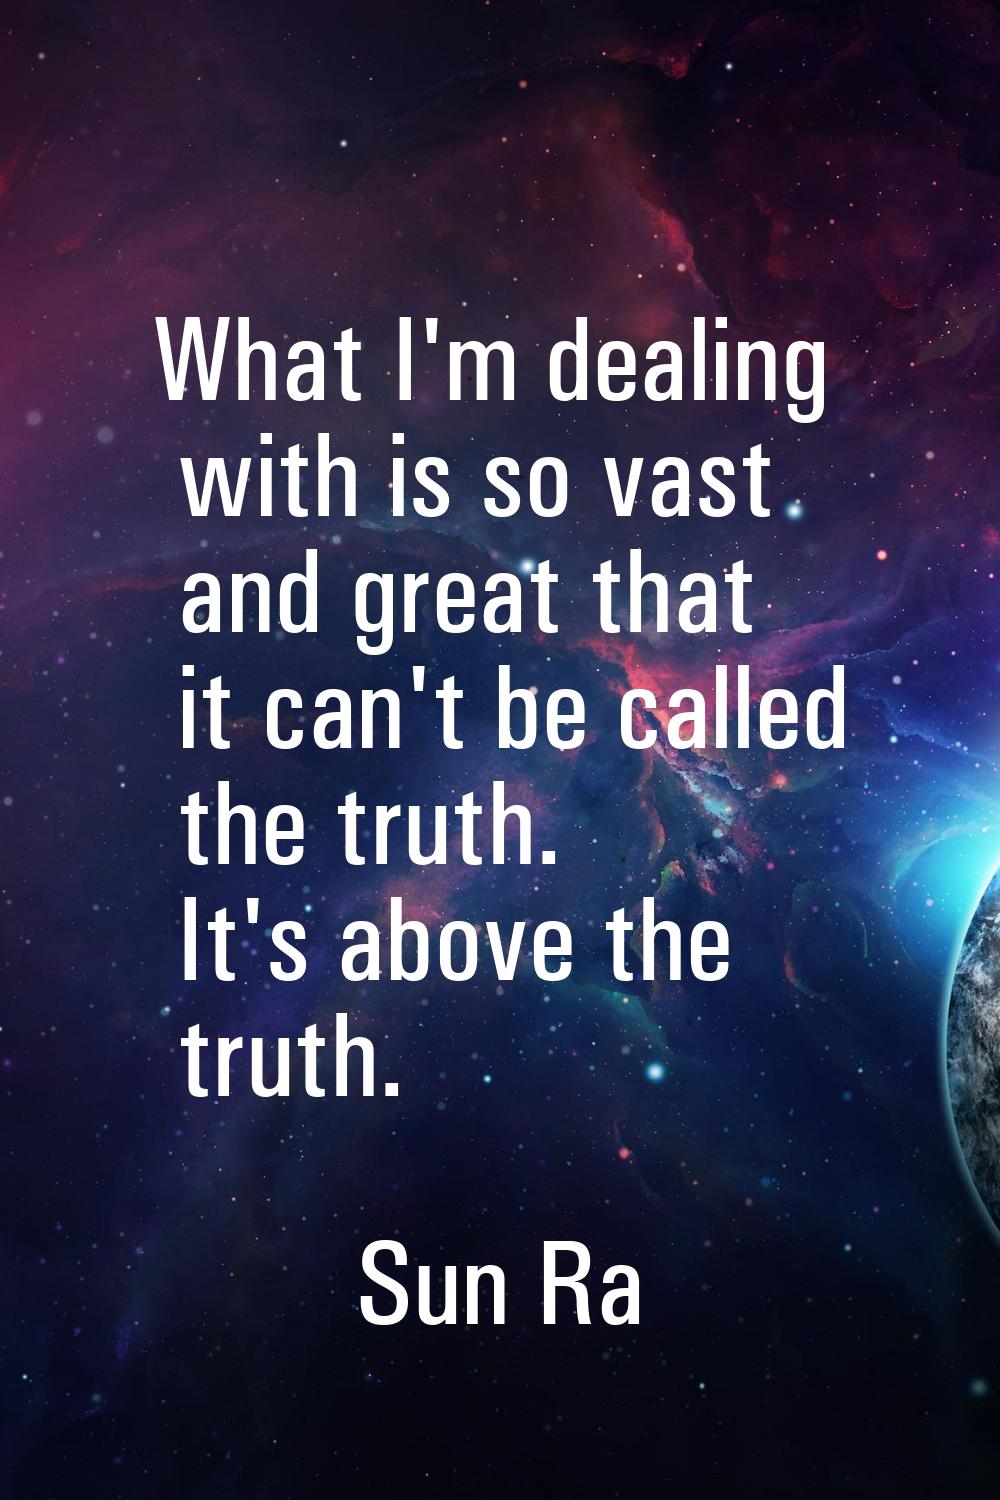 What I'm dealing with is so vast and great that it can't be called the truth. It's above the truth.